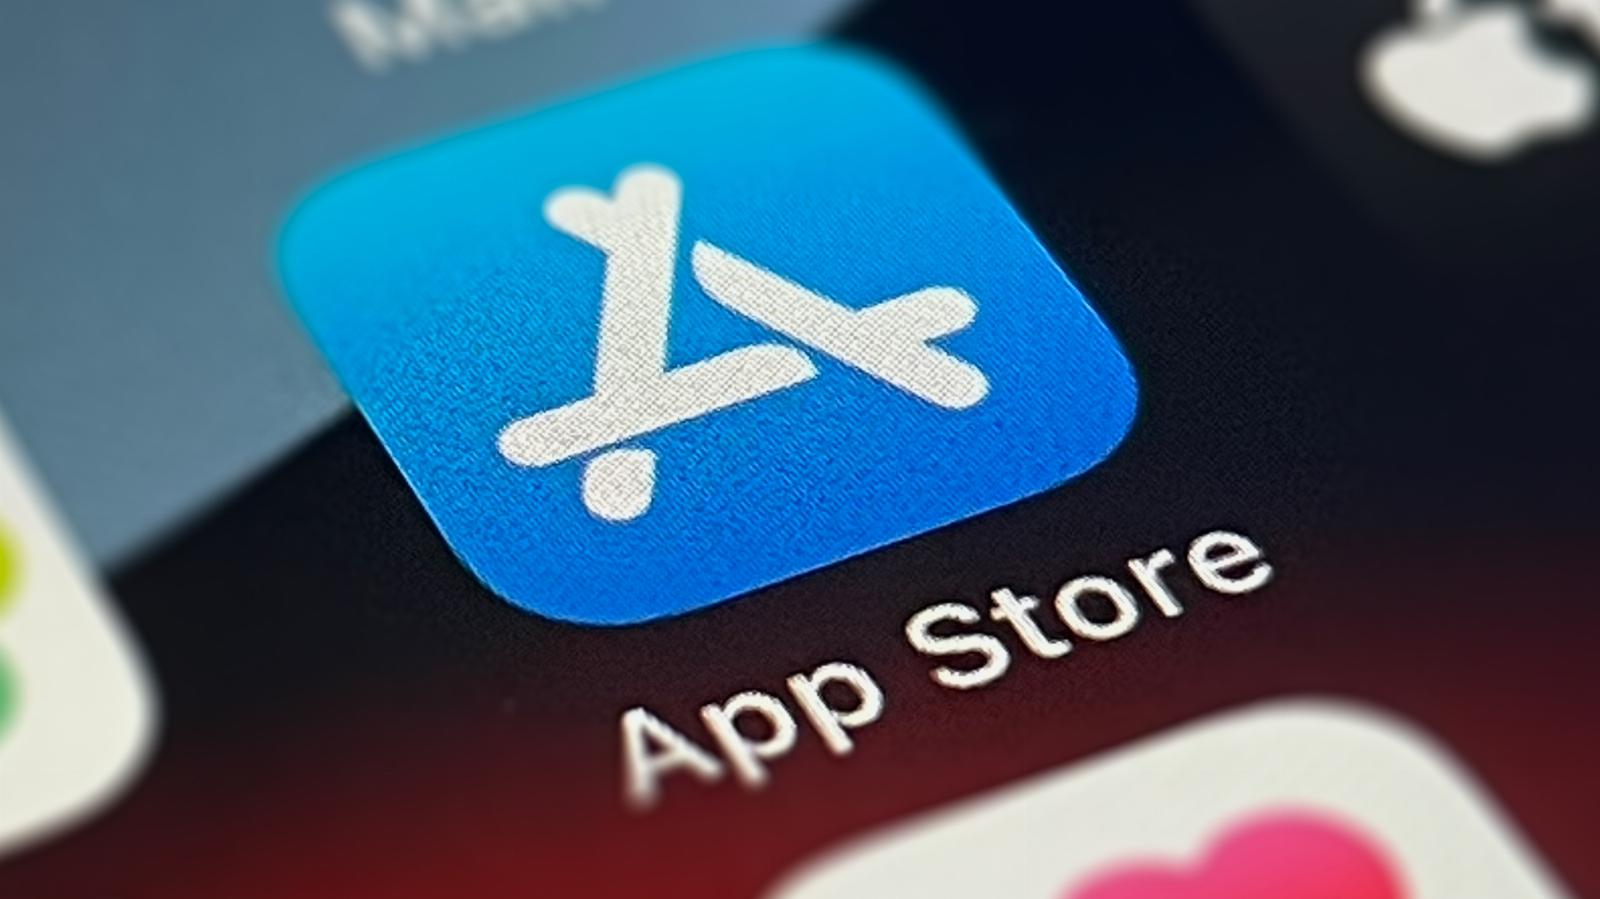 Apple says its App Store prevented over $2 billion in fraudulent transactions last year